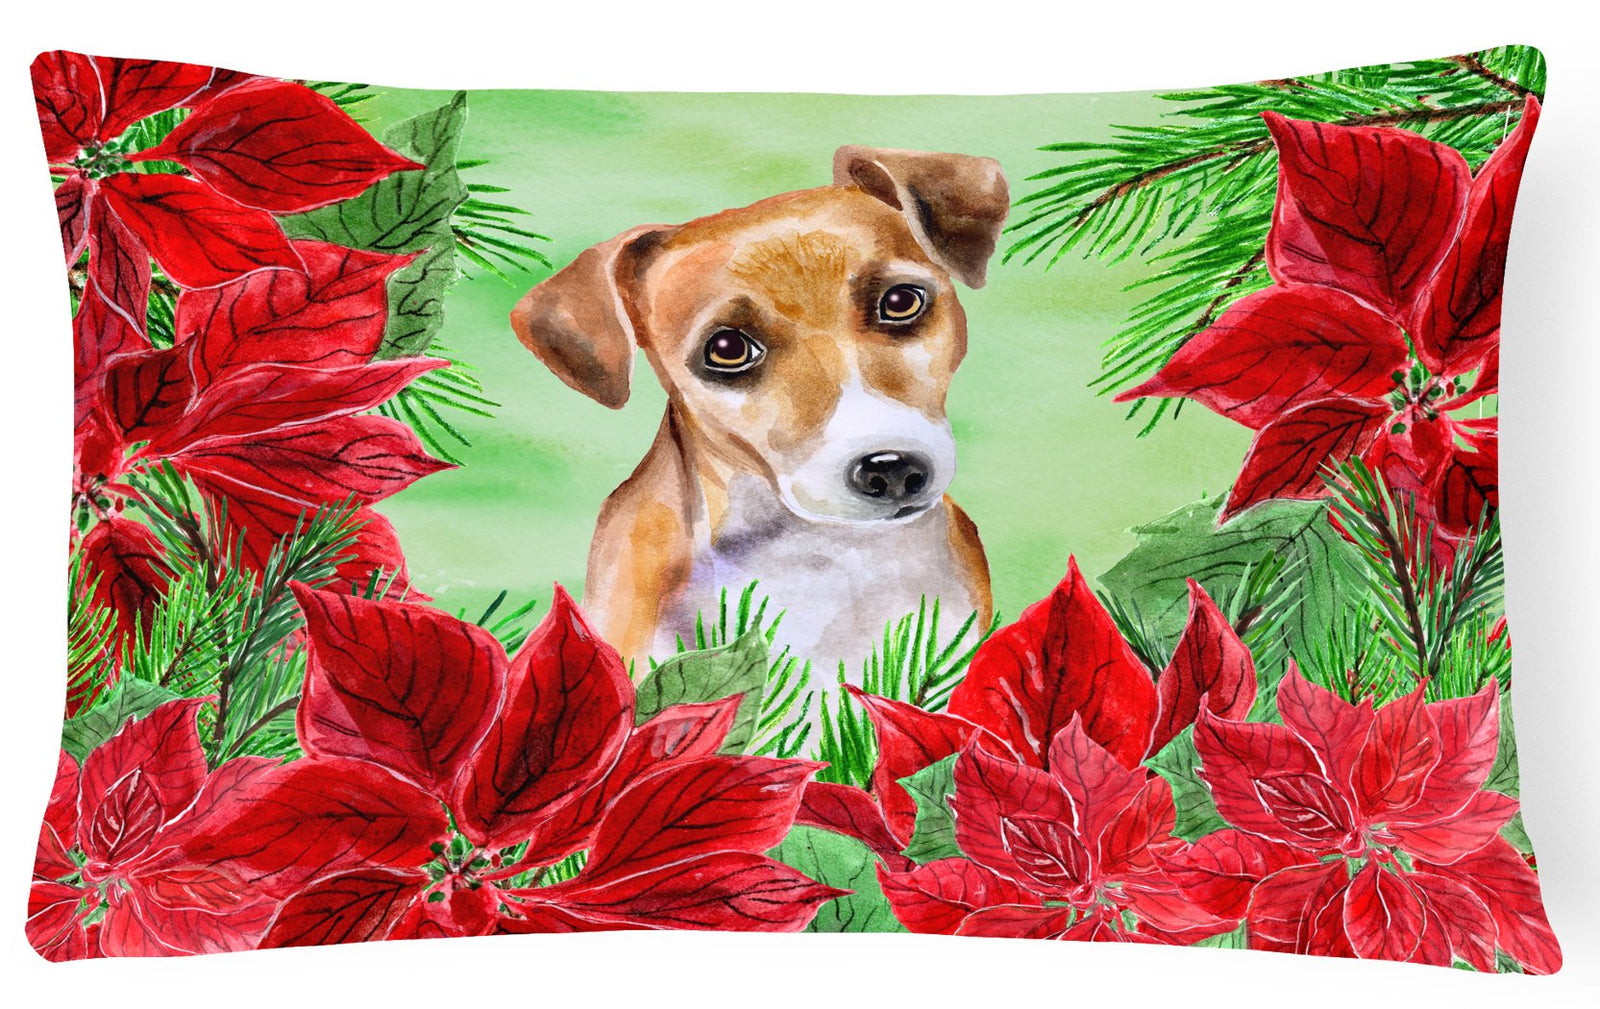 Jack Russell Terrier #2 Poinsettas Canvas Fabric Decorative Pillow CK1360PW1216 by Caroline's Treasures